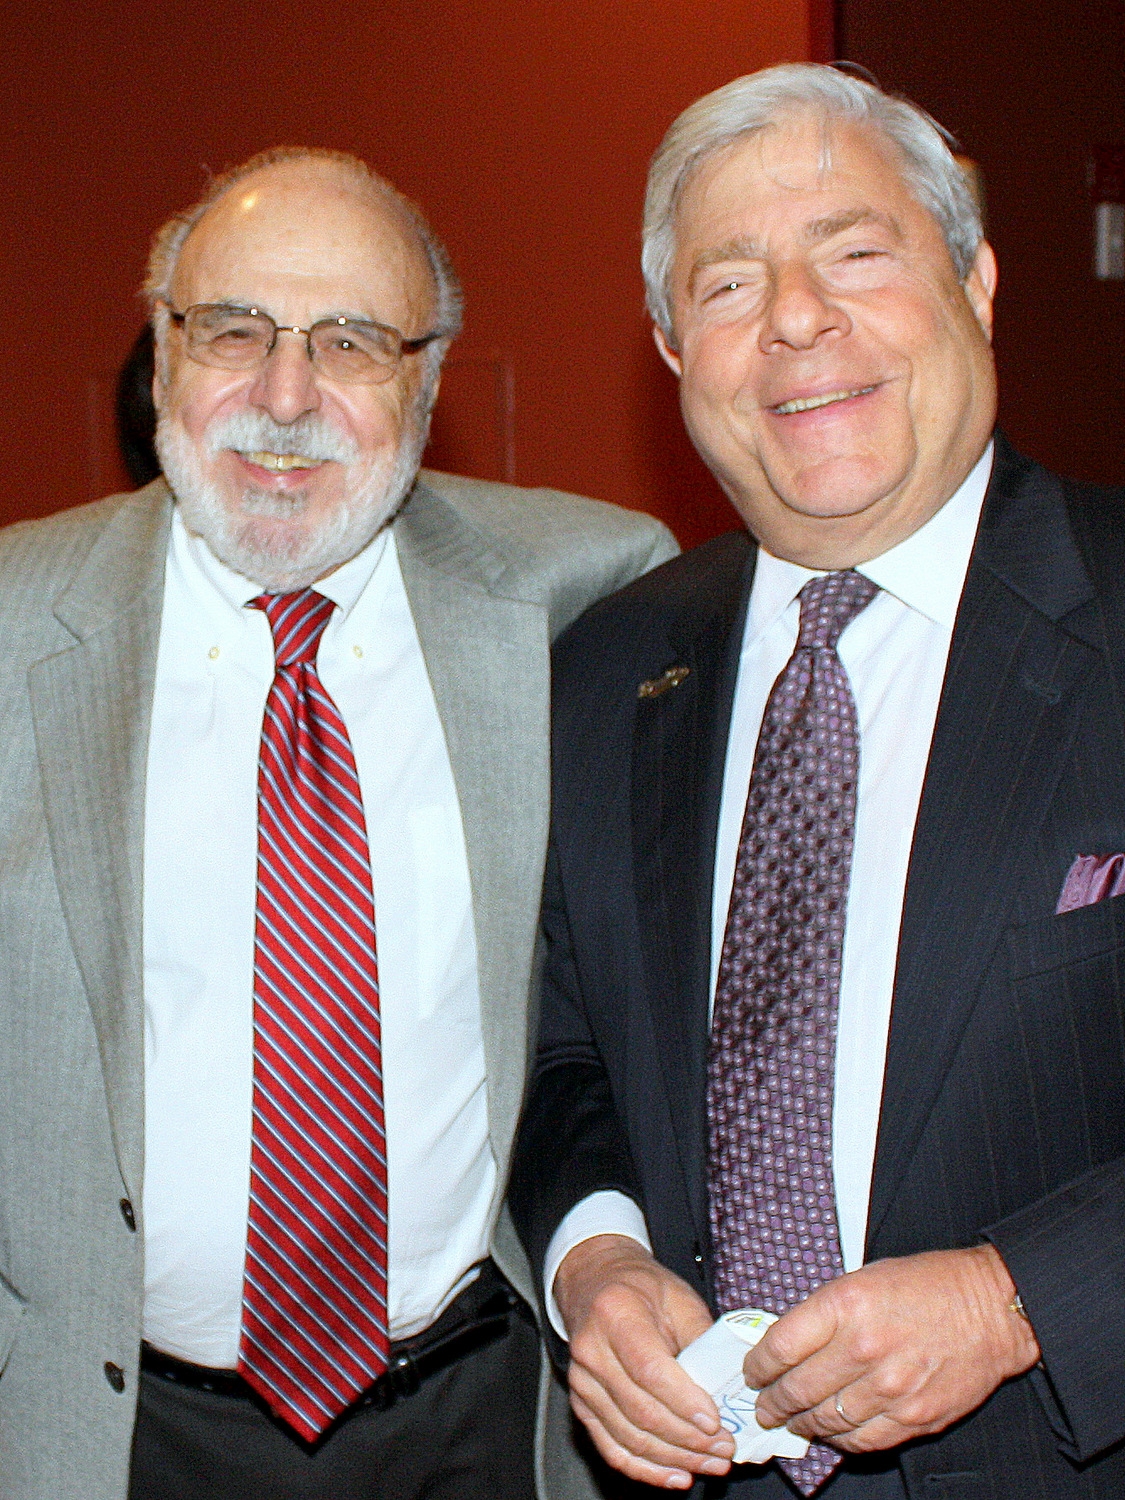 Stanley Sherbell, MD, and Marty Markowitz